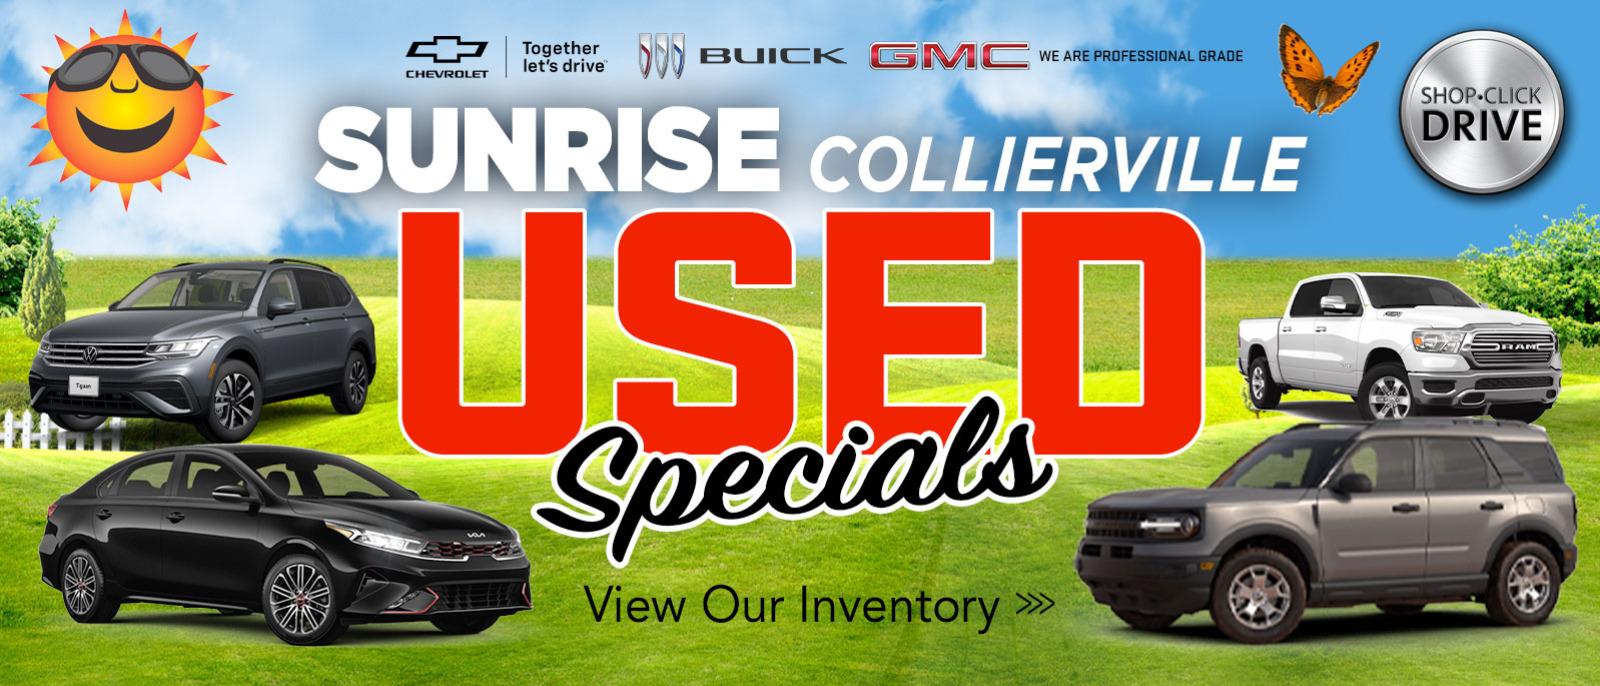 Sunrice Sollierville Used Inventory Specials